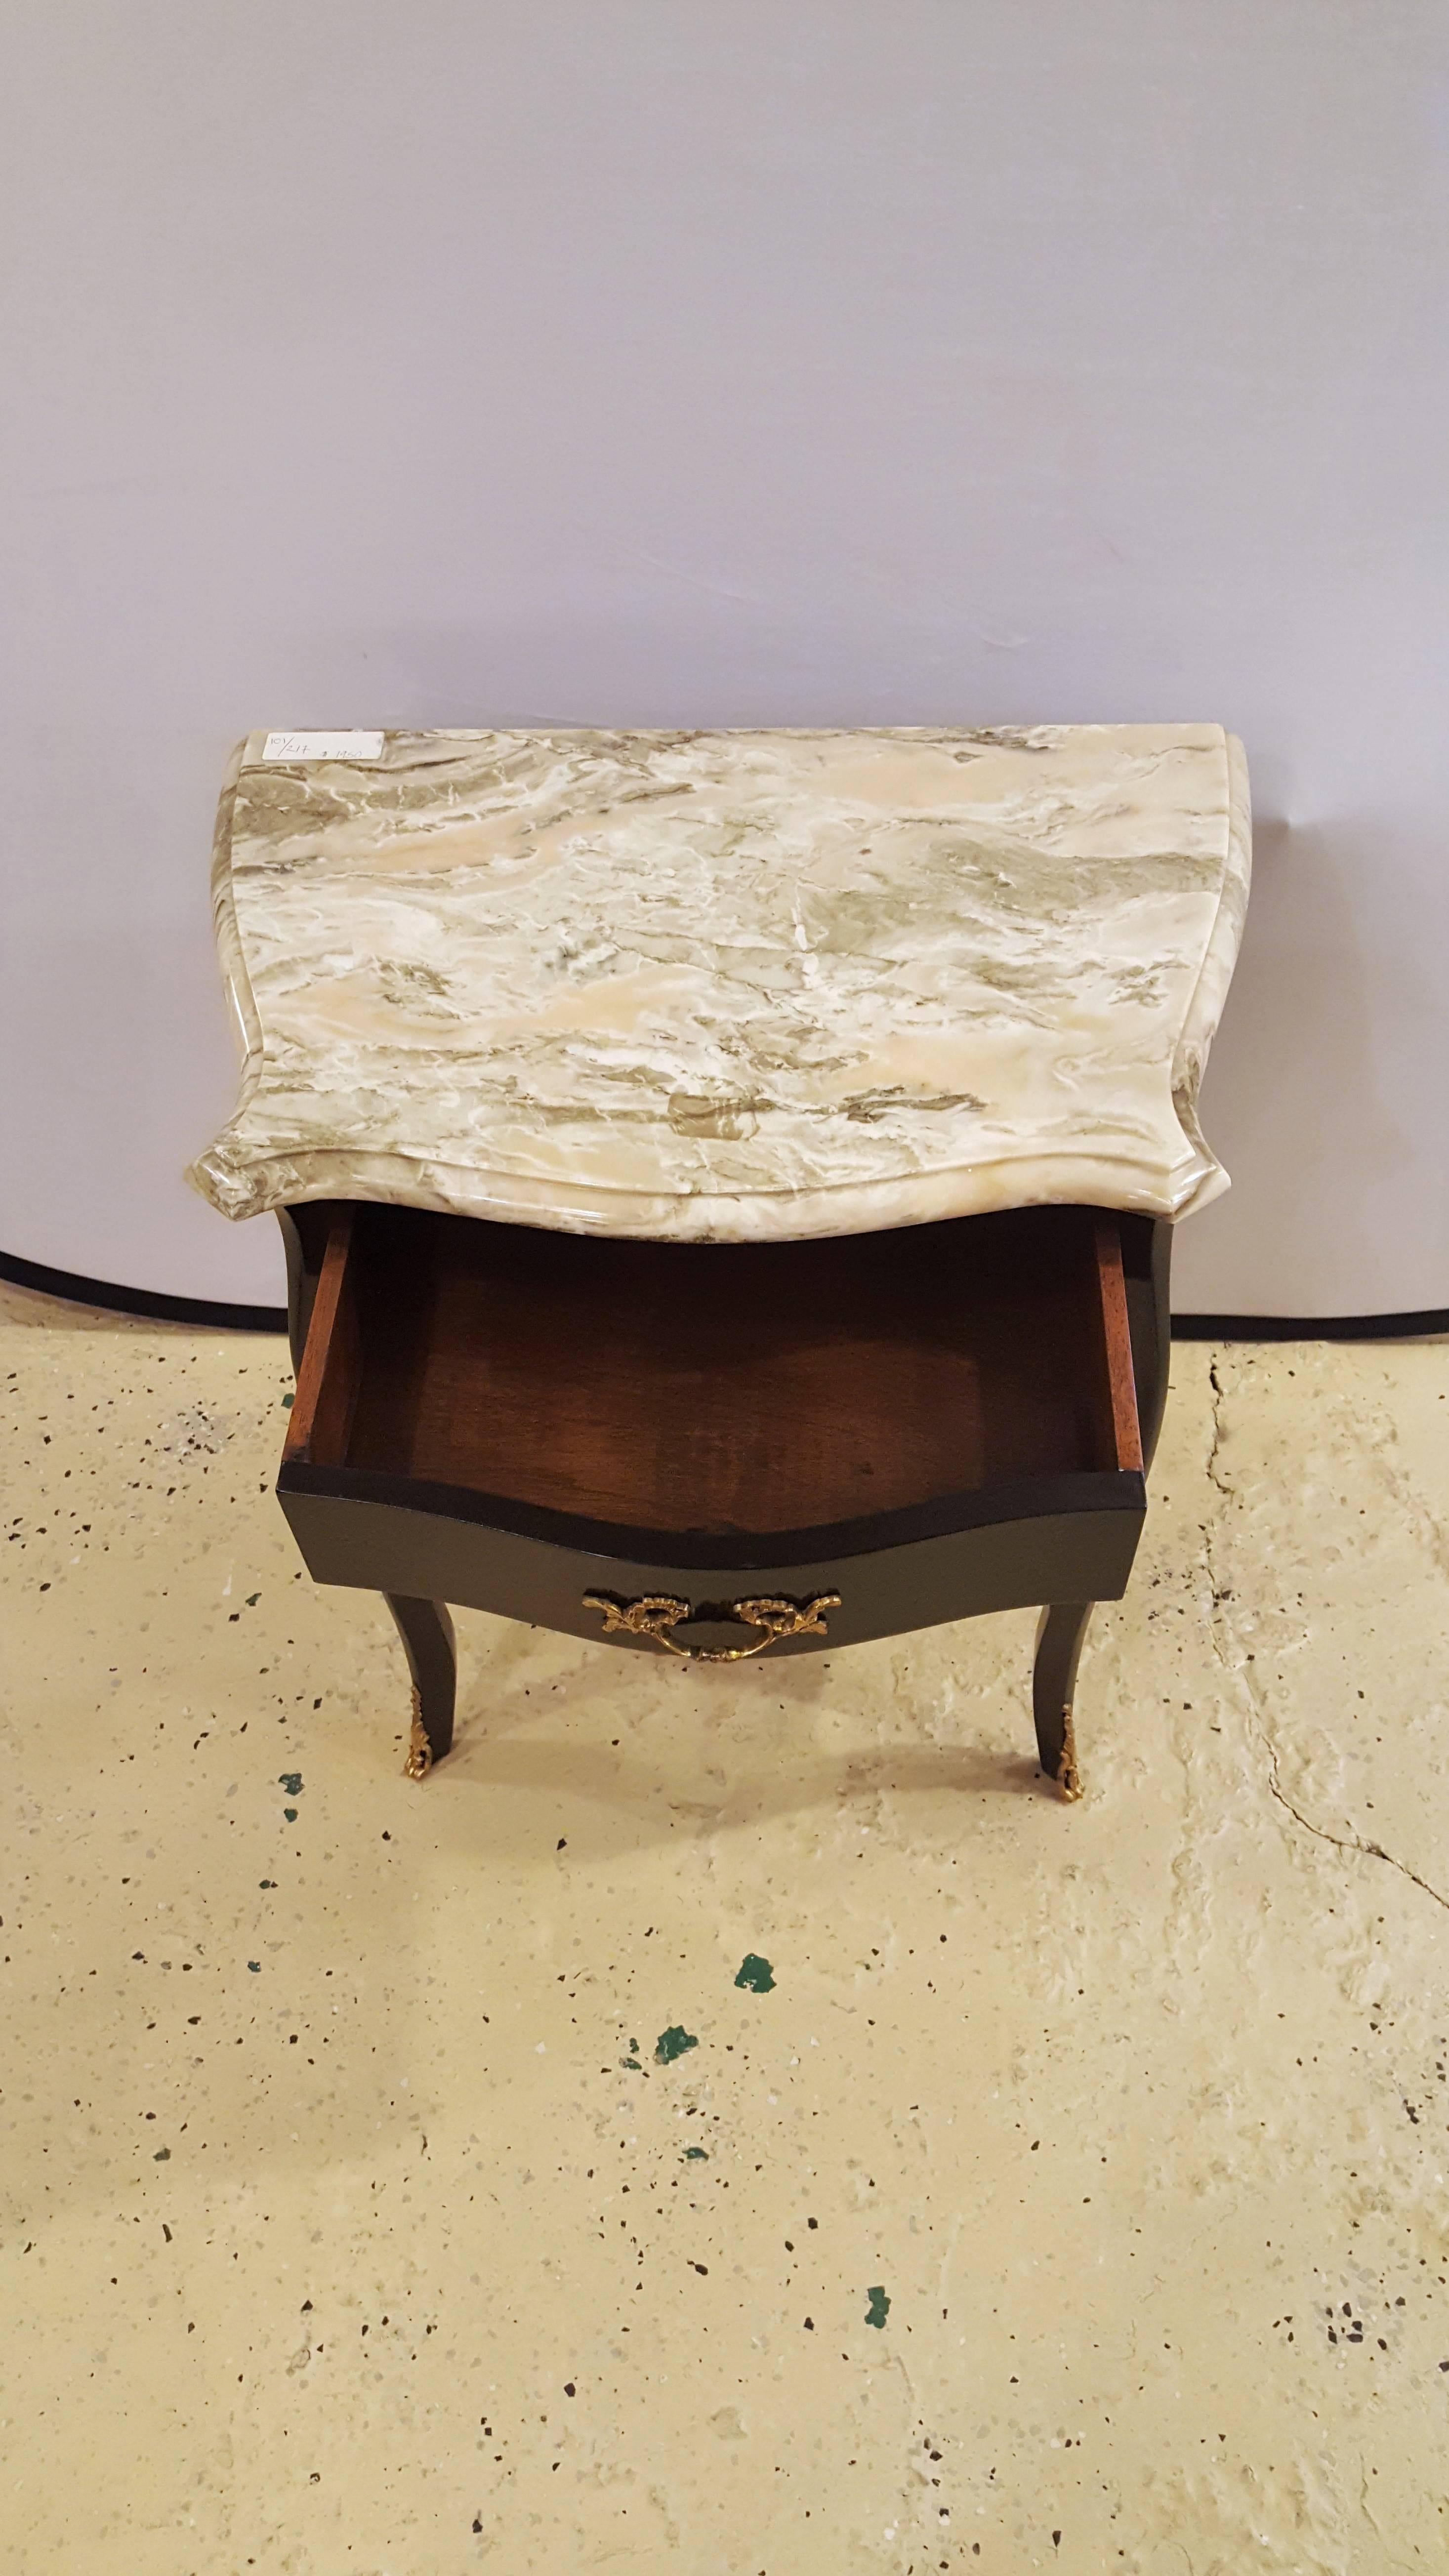 Pair of Hollywood Regency Style Ebonized Marble-Top Nightstands / End Tables 2